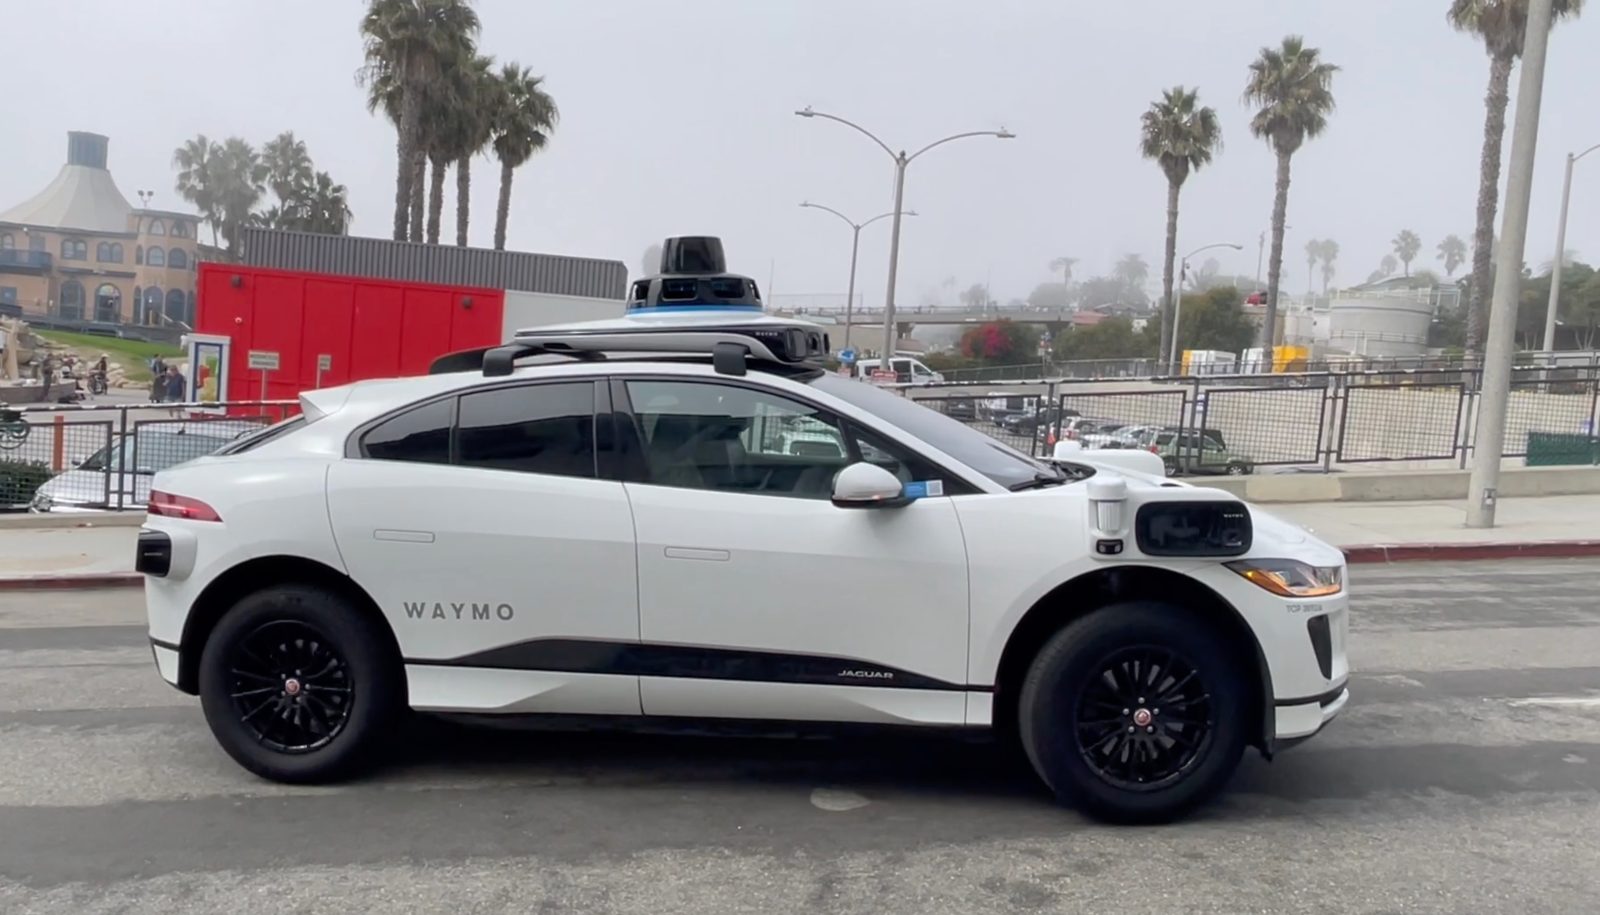 We tested Waymo's driverless taxi in LA in the perfect chaos of Venice Beach